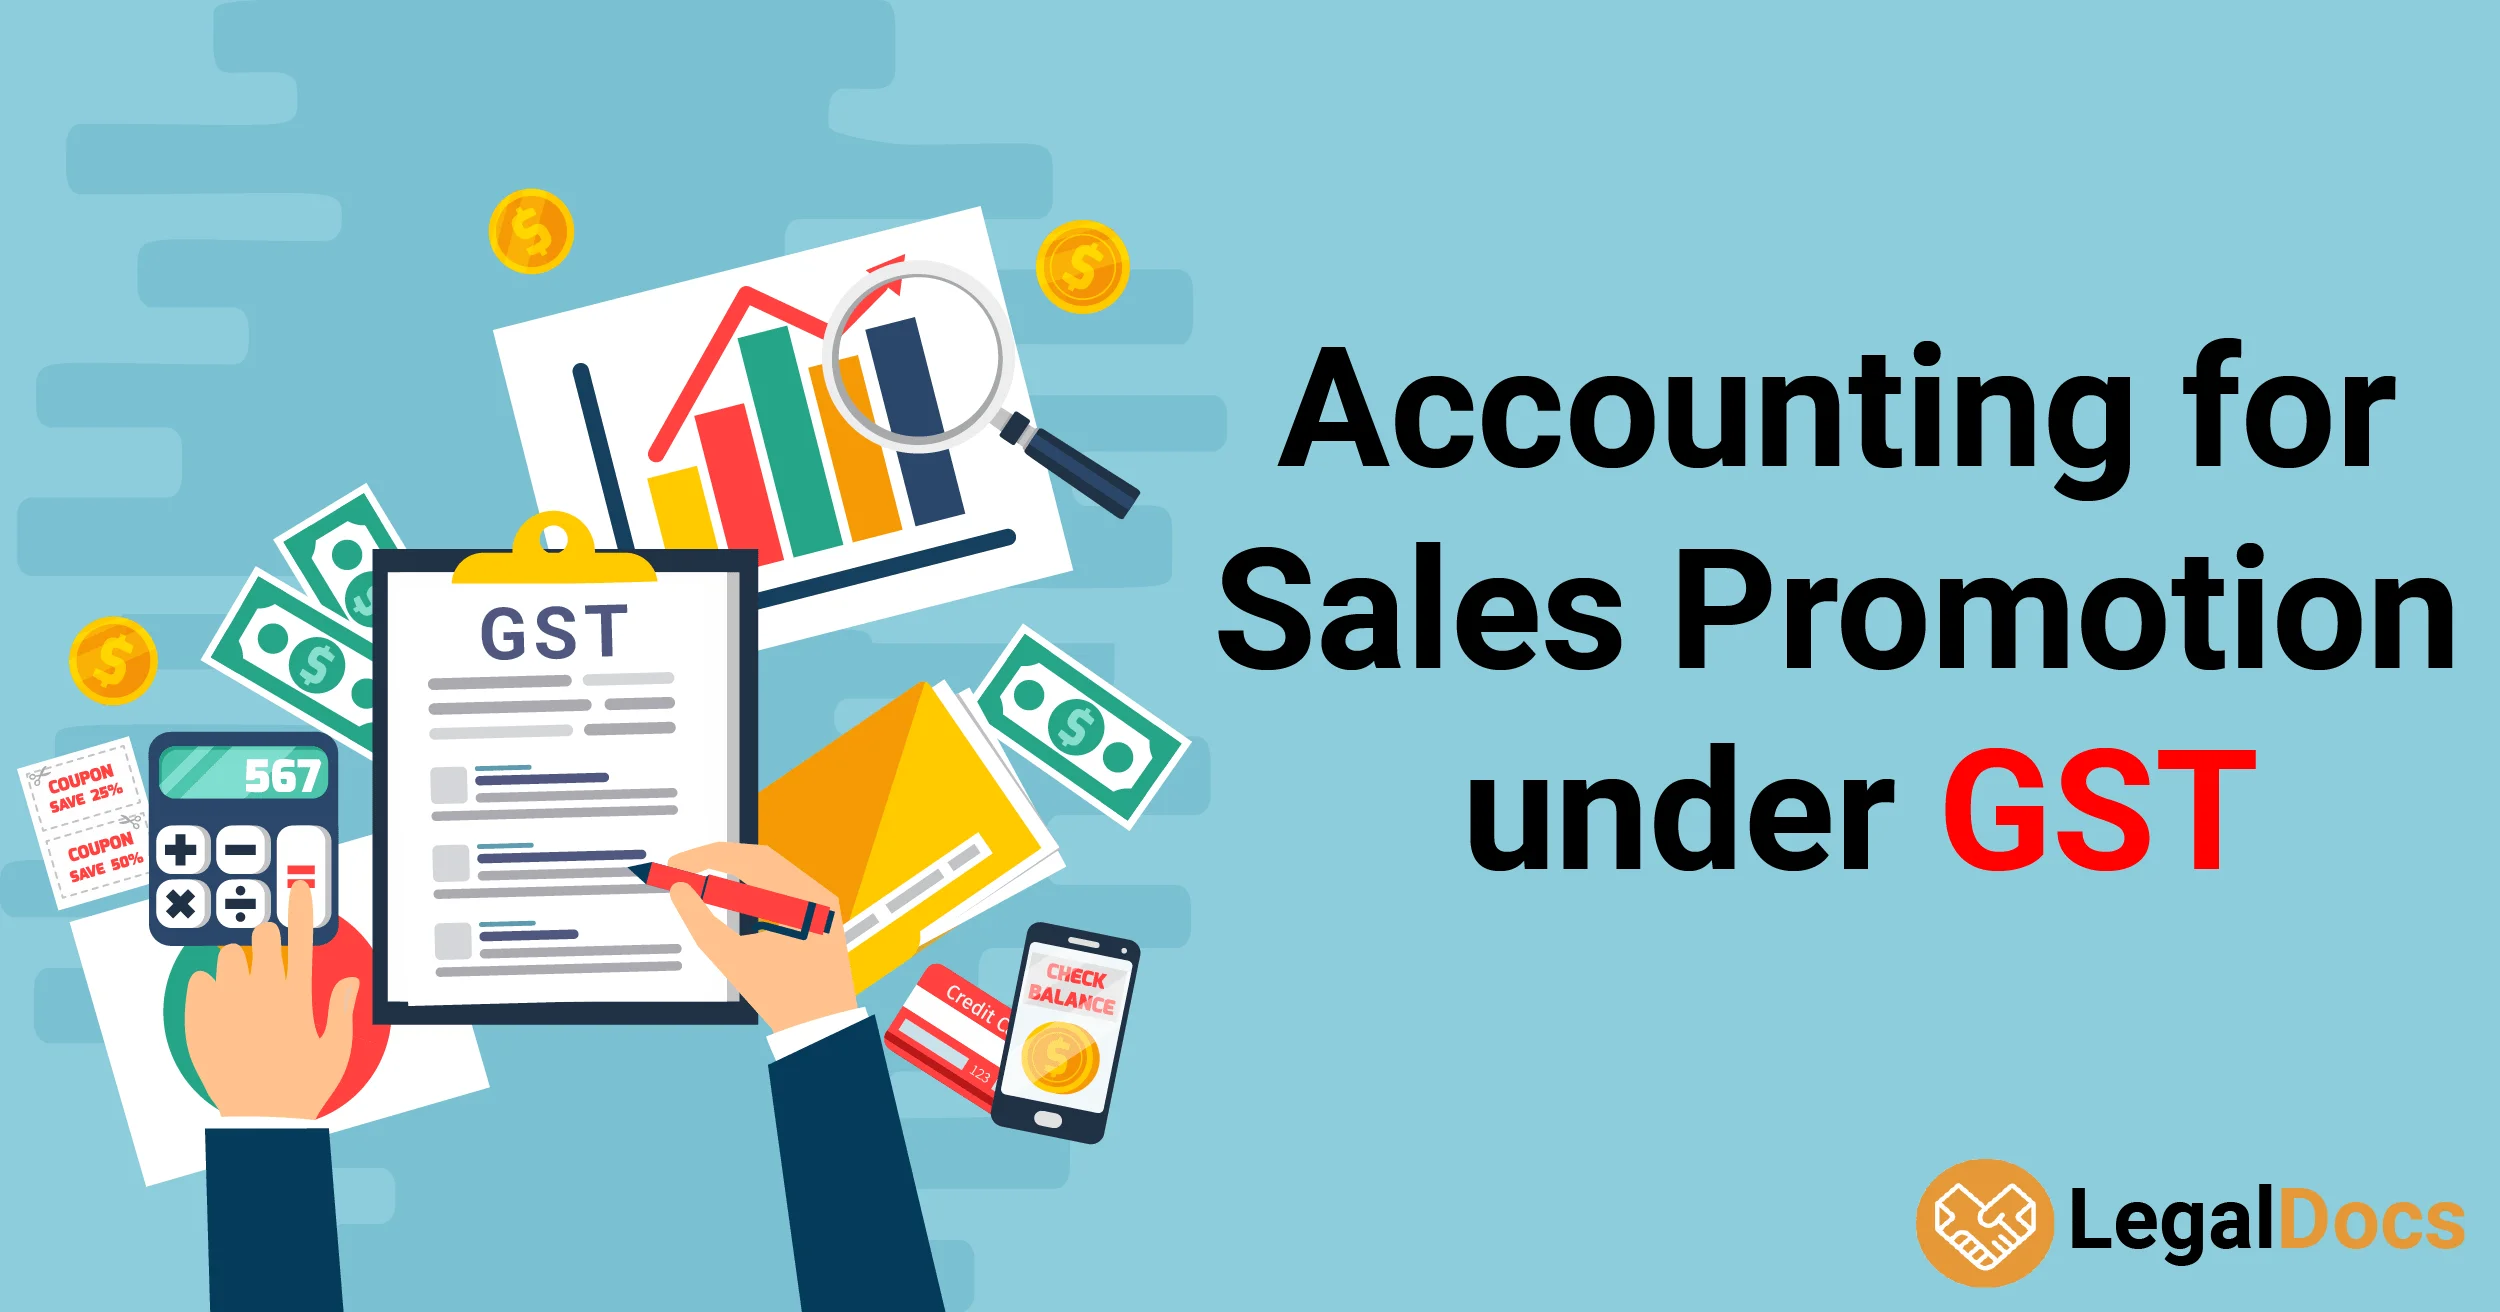 Accounting for Sales Promotion under GST - LegalDocs